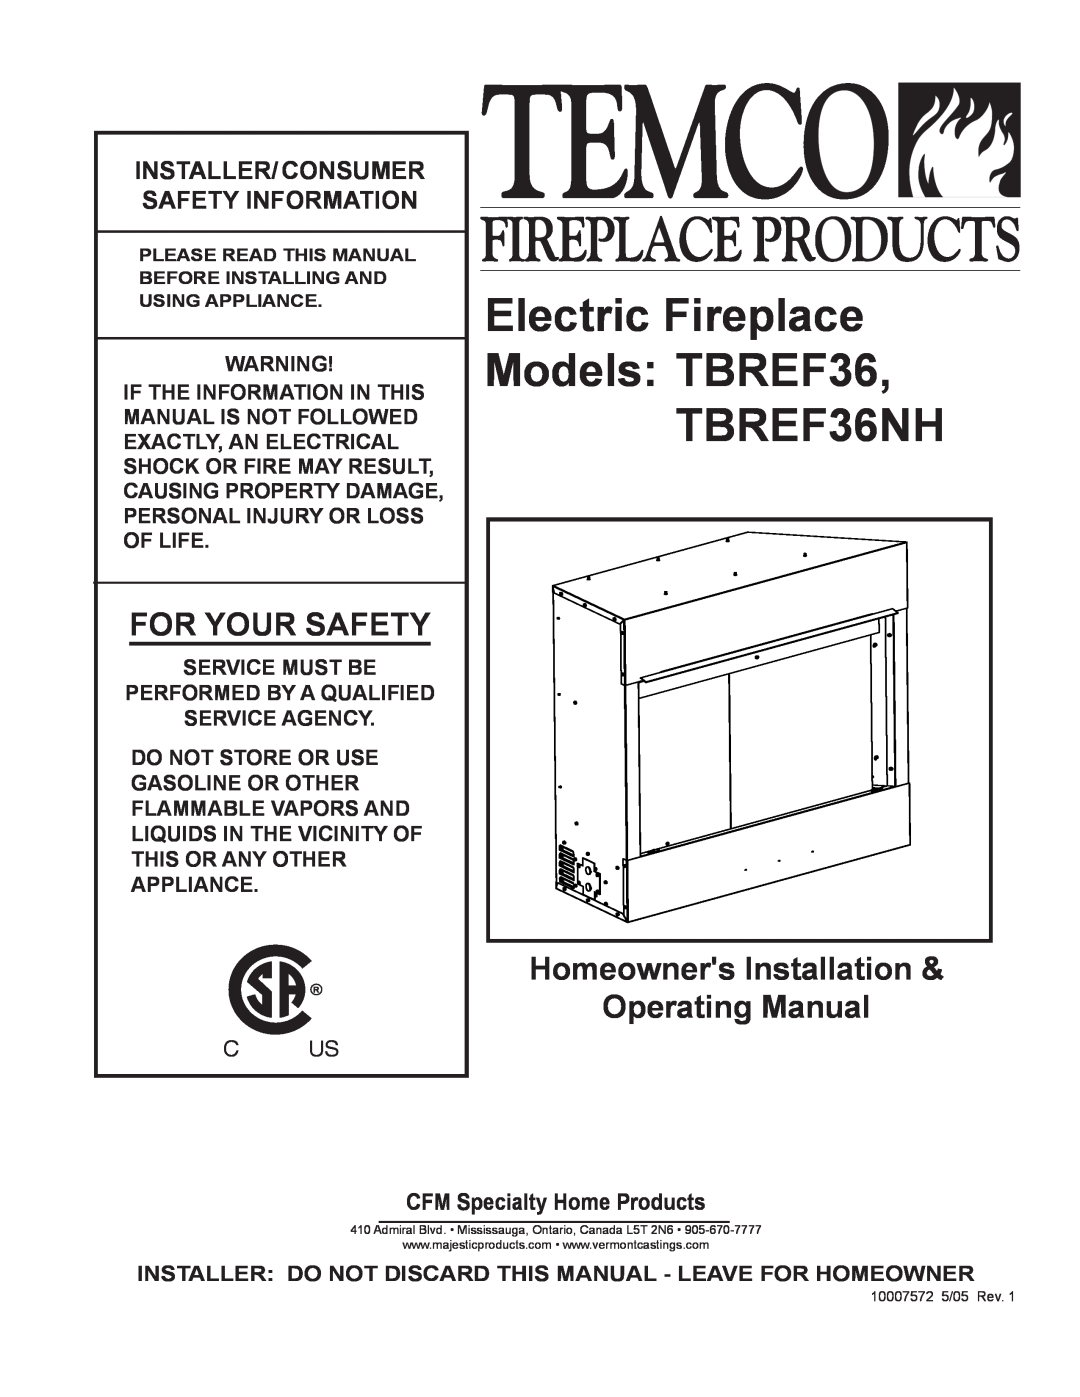 Vermont Casting TBREF36 manual For Your Safety, Homeowners Installation & Operating Manual, CFM Specialty Home Products 